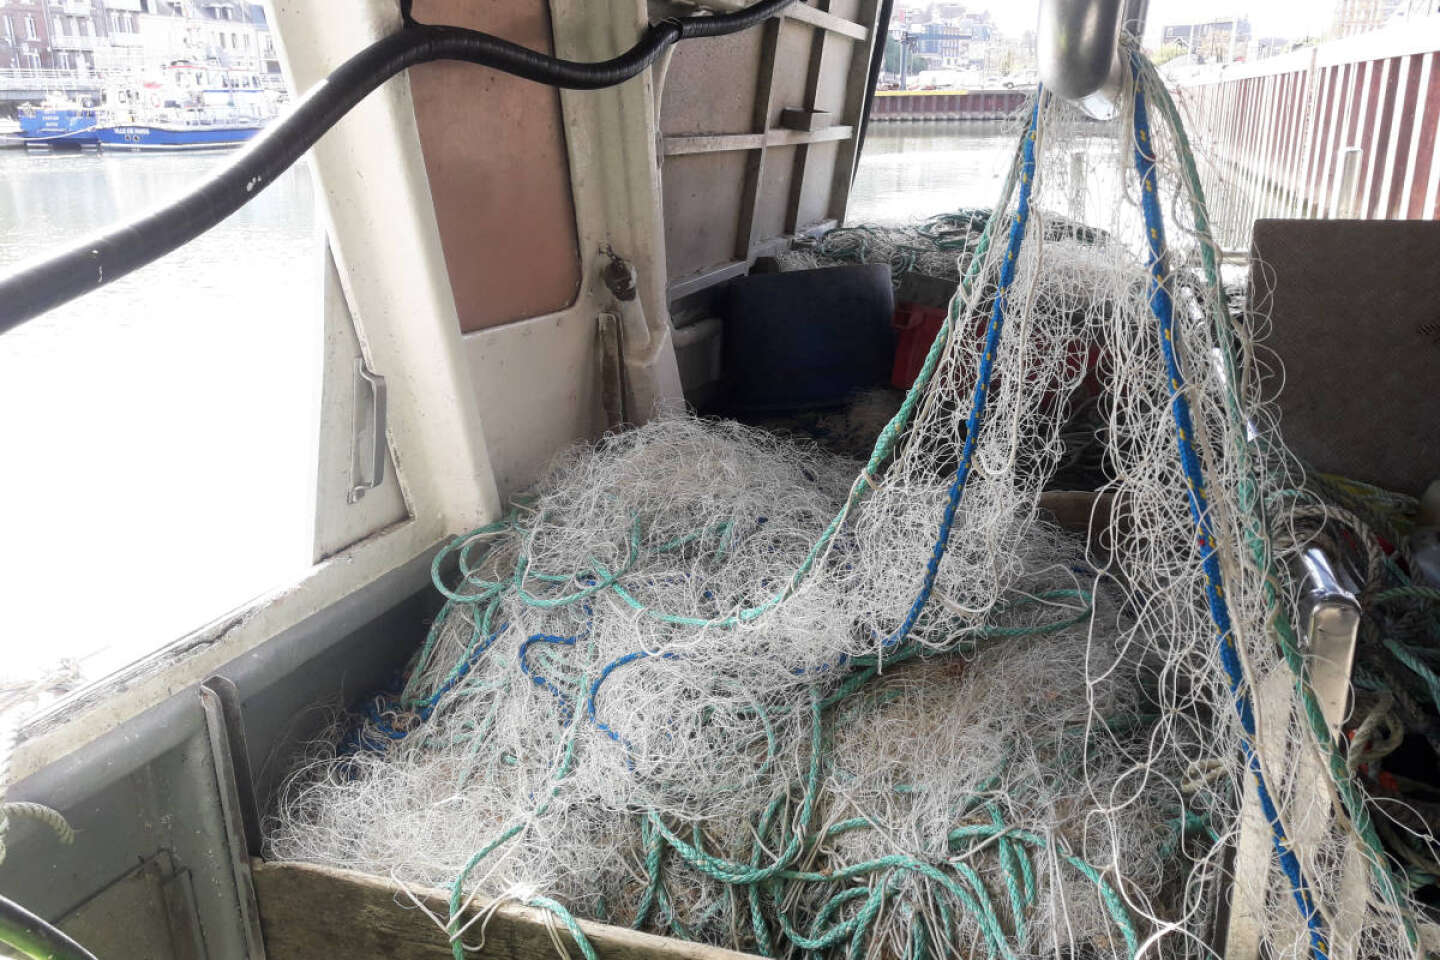 Biosourced and biodegradable fishing nets could help avoid a